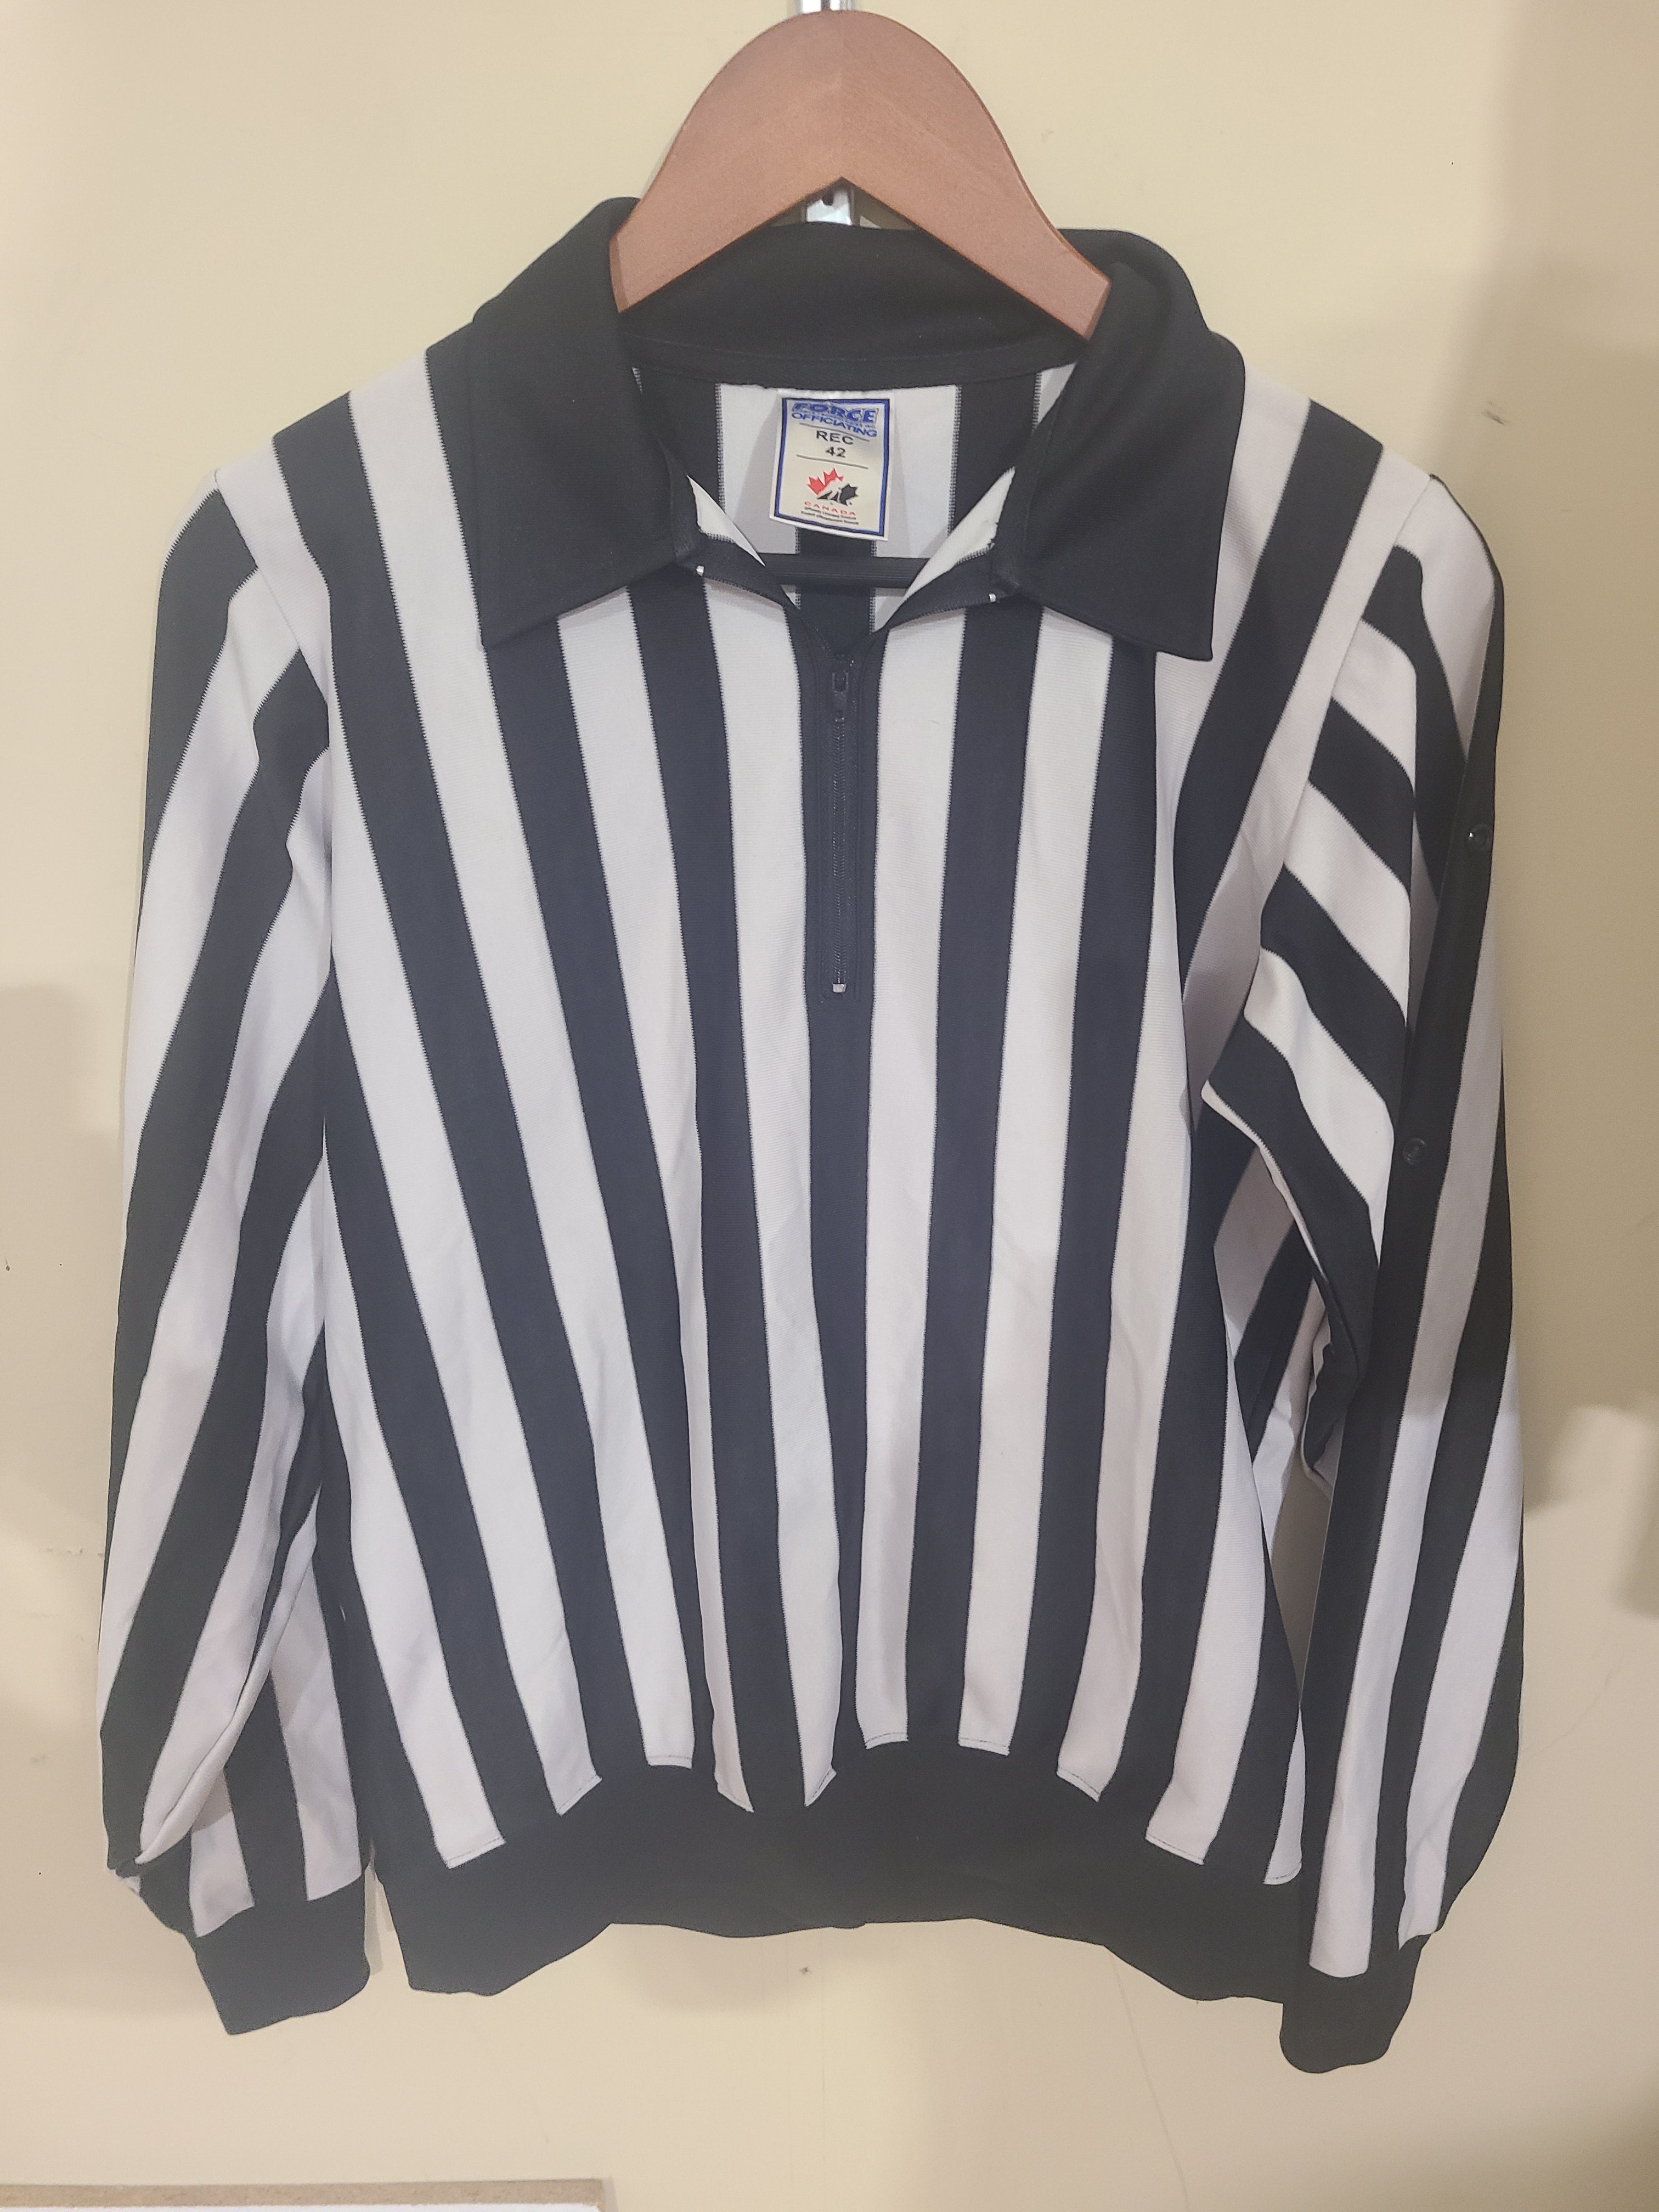 Referee Jersey with Red Bands Size 46